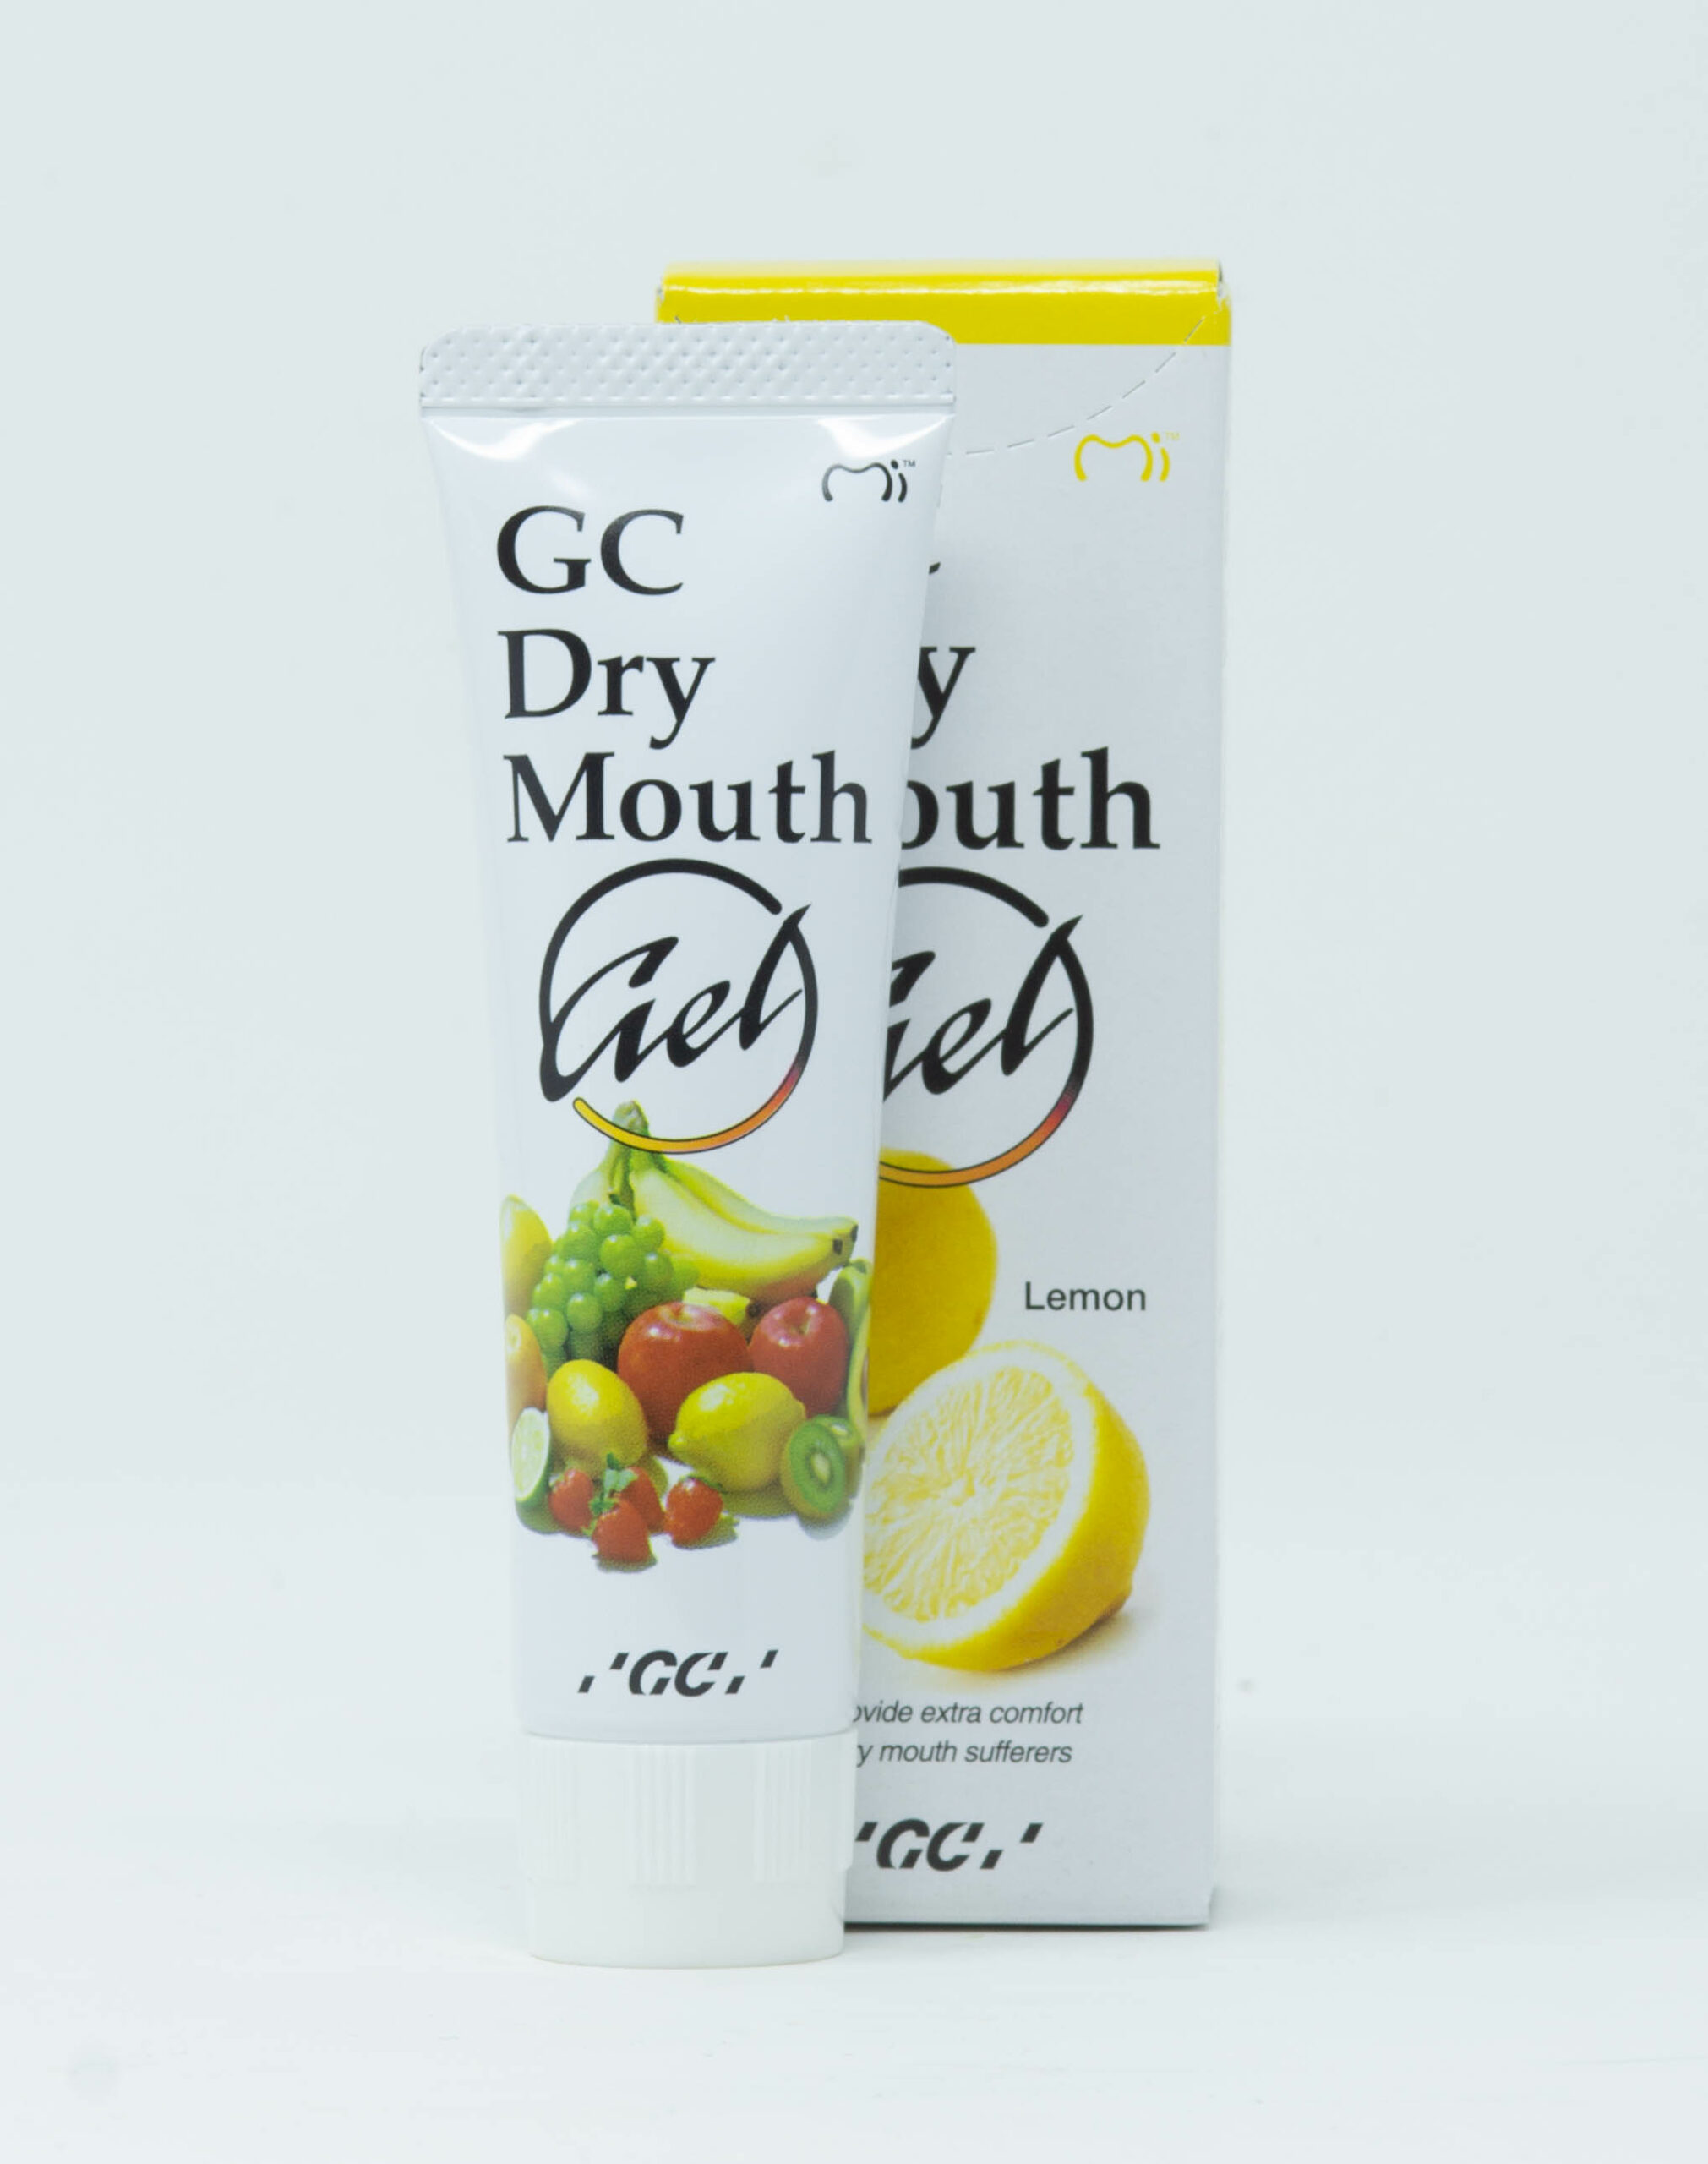 GC Gel Dry Mouth Limone - 40 g